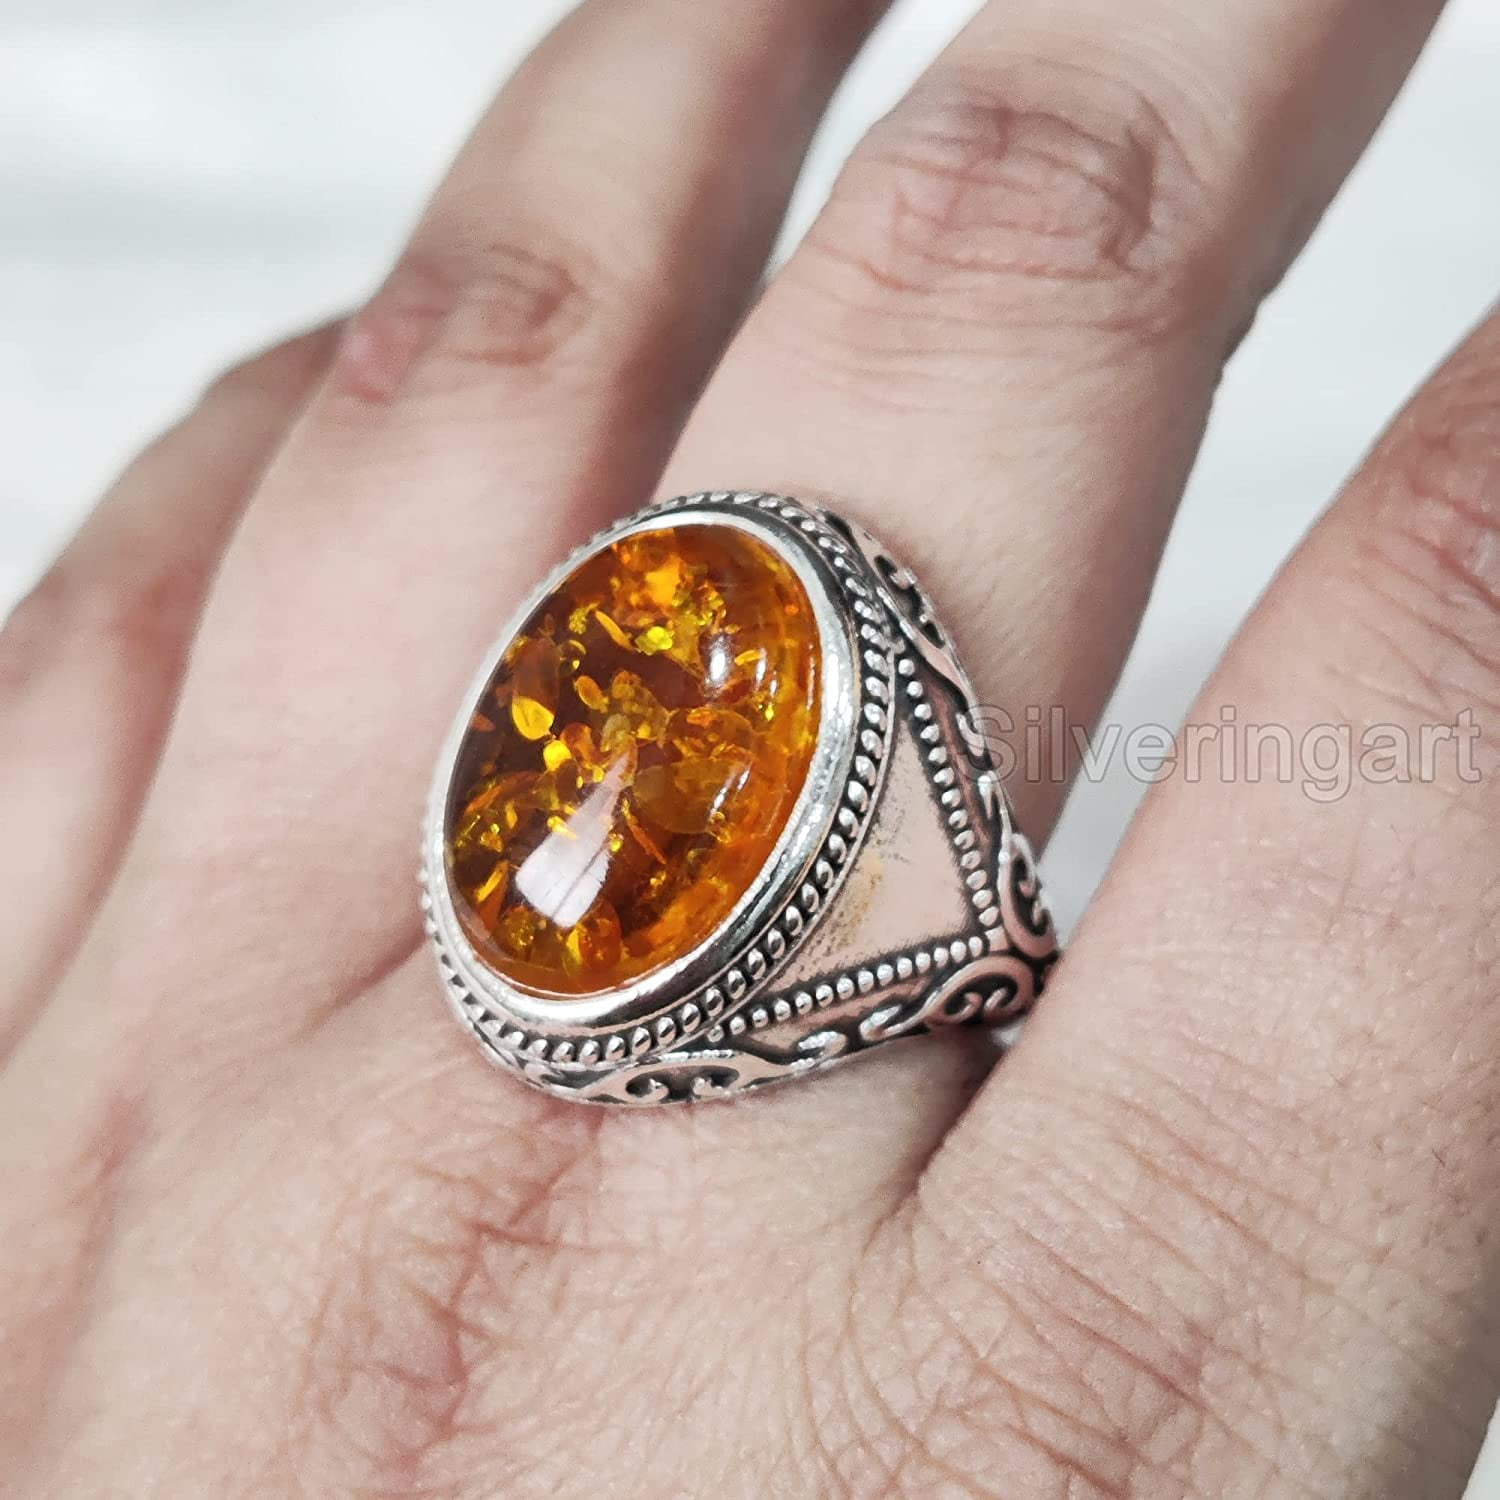 Curved Silver Men's Ring with Red Agate